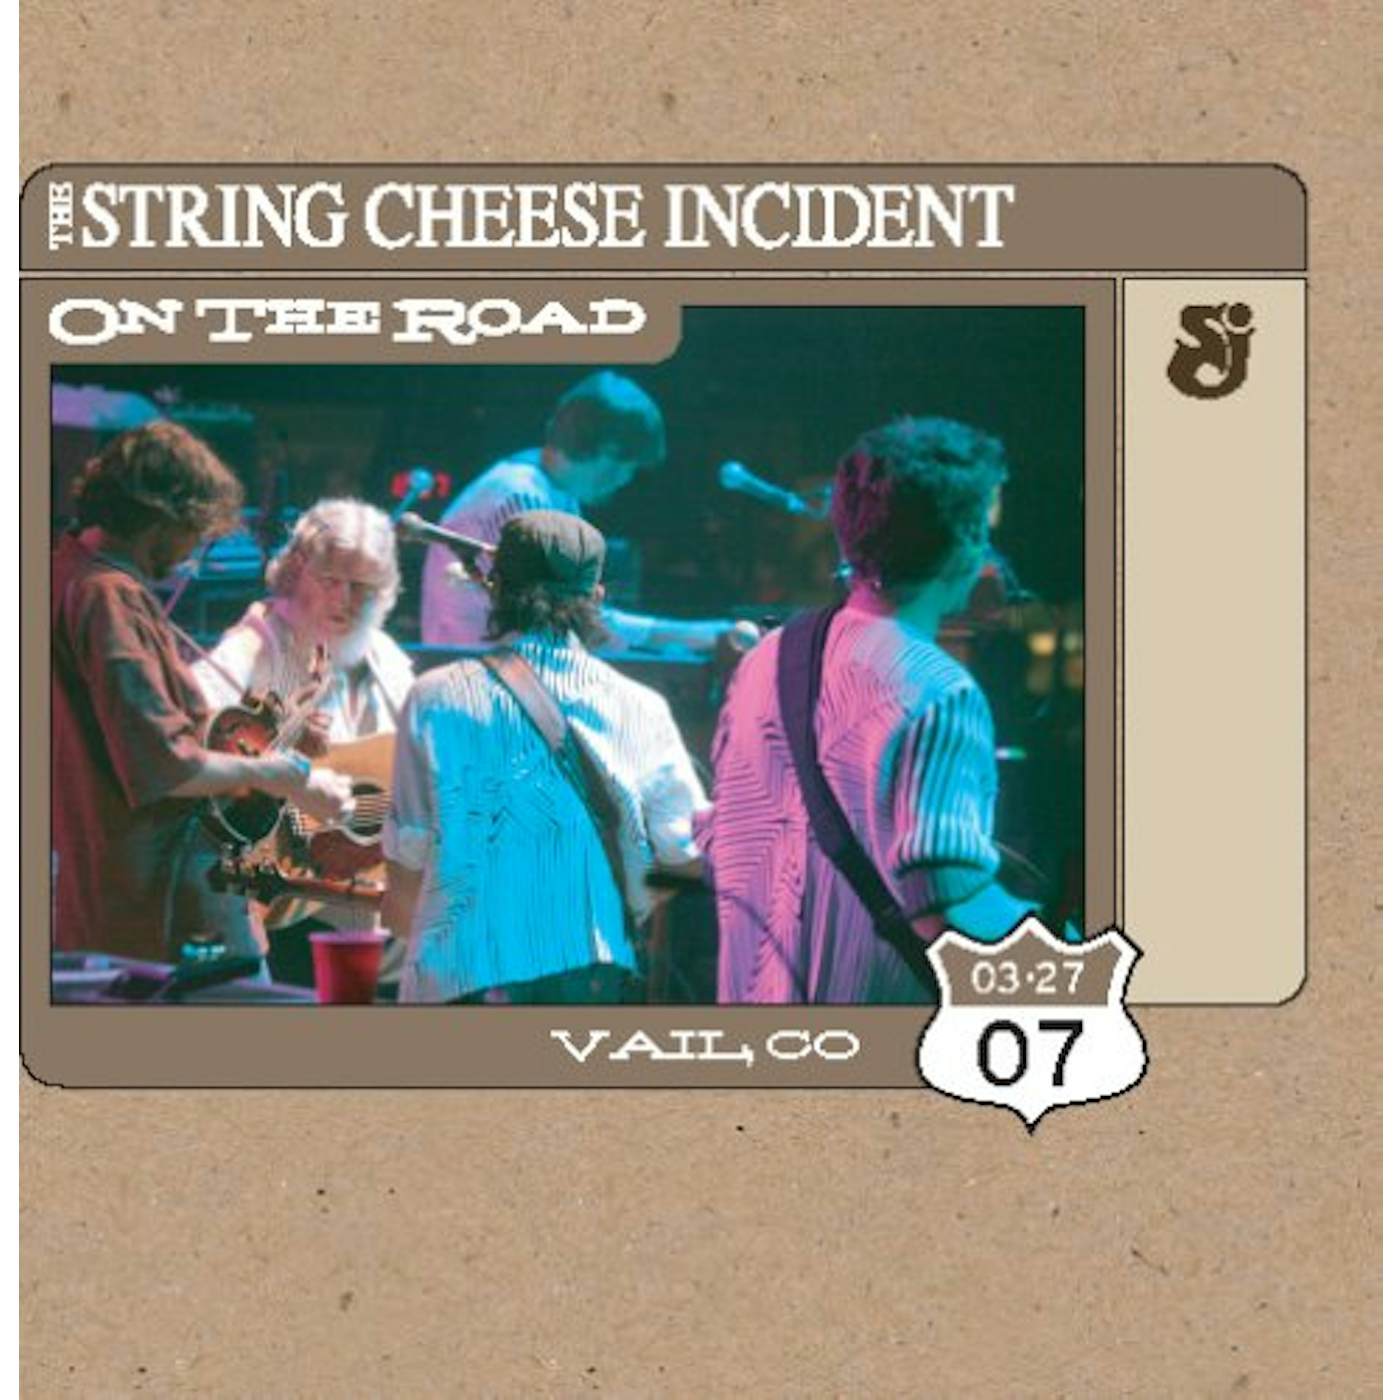 The String Cheese Incident ON THE ROAD: VAIL CO 3-26-07 CD